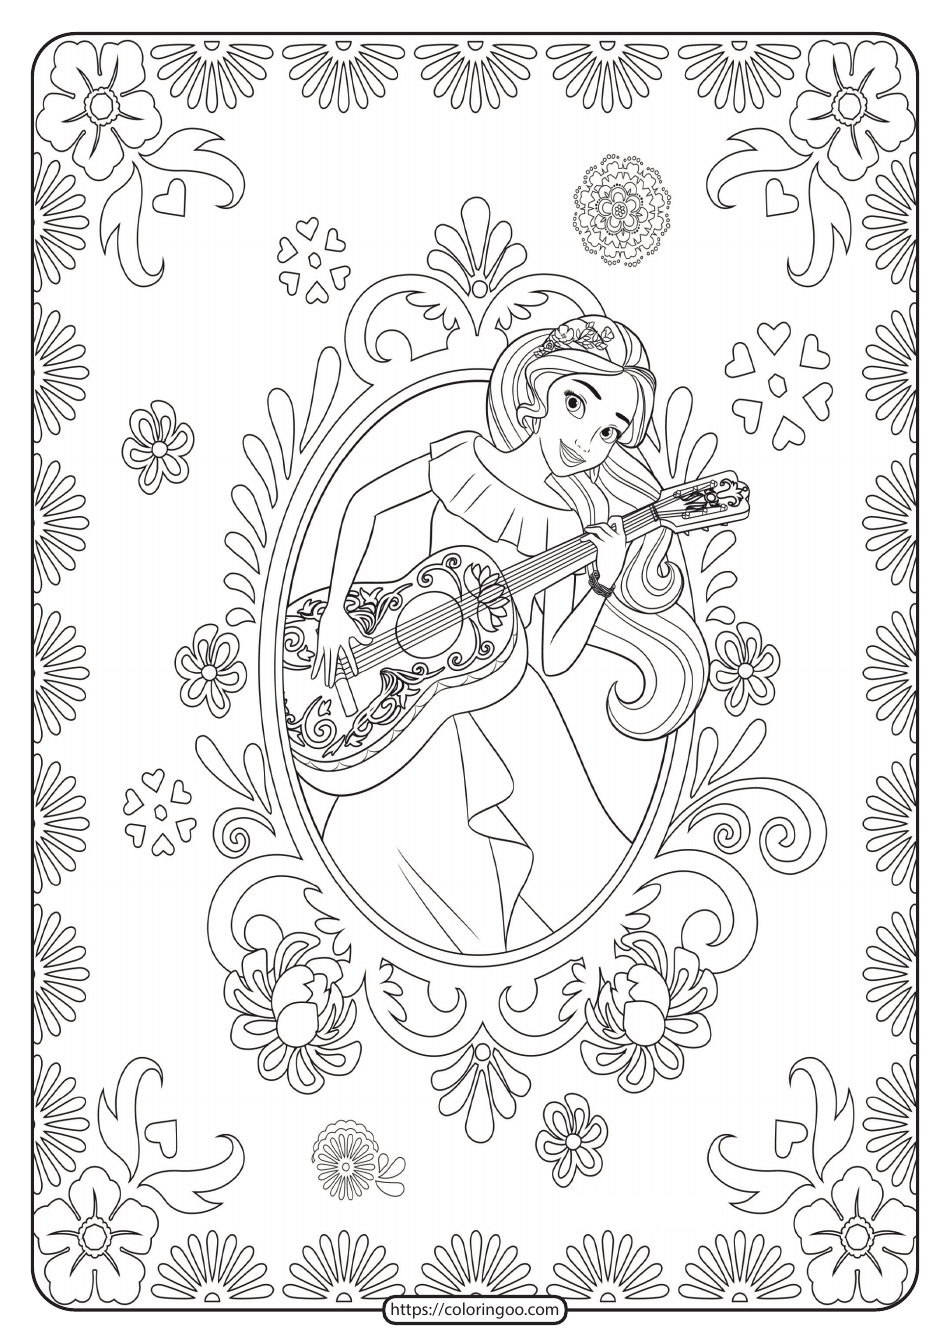 Disney Coloring Page - Elena of Avalor Image Document Preview